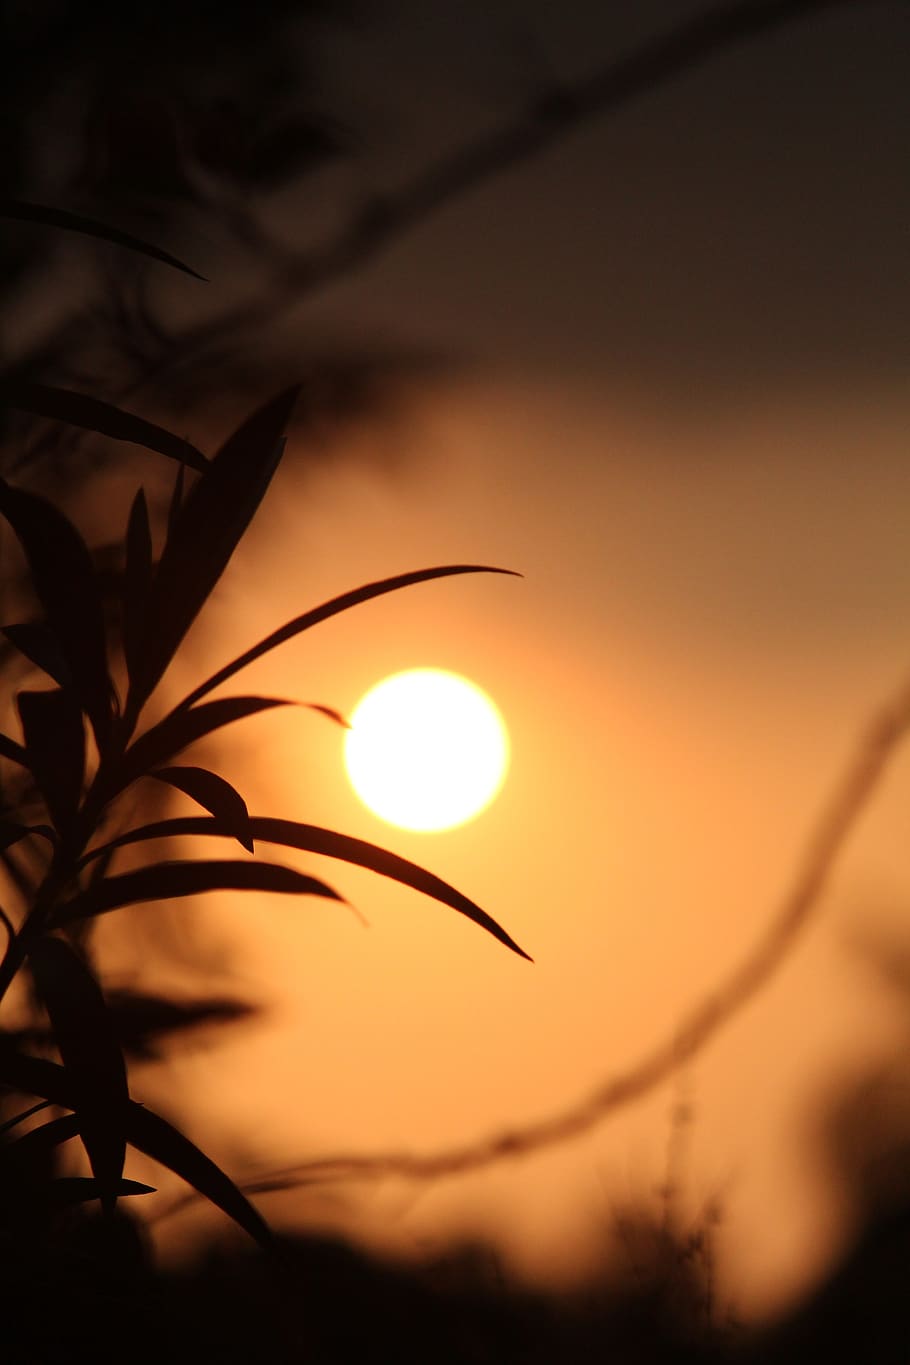 kerala, india, evening, sun, plant, leaf, silhouette, natural, colorful, outdoor